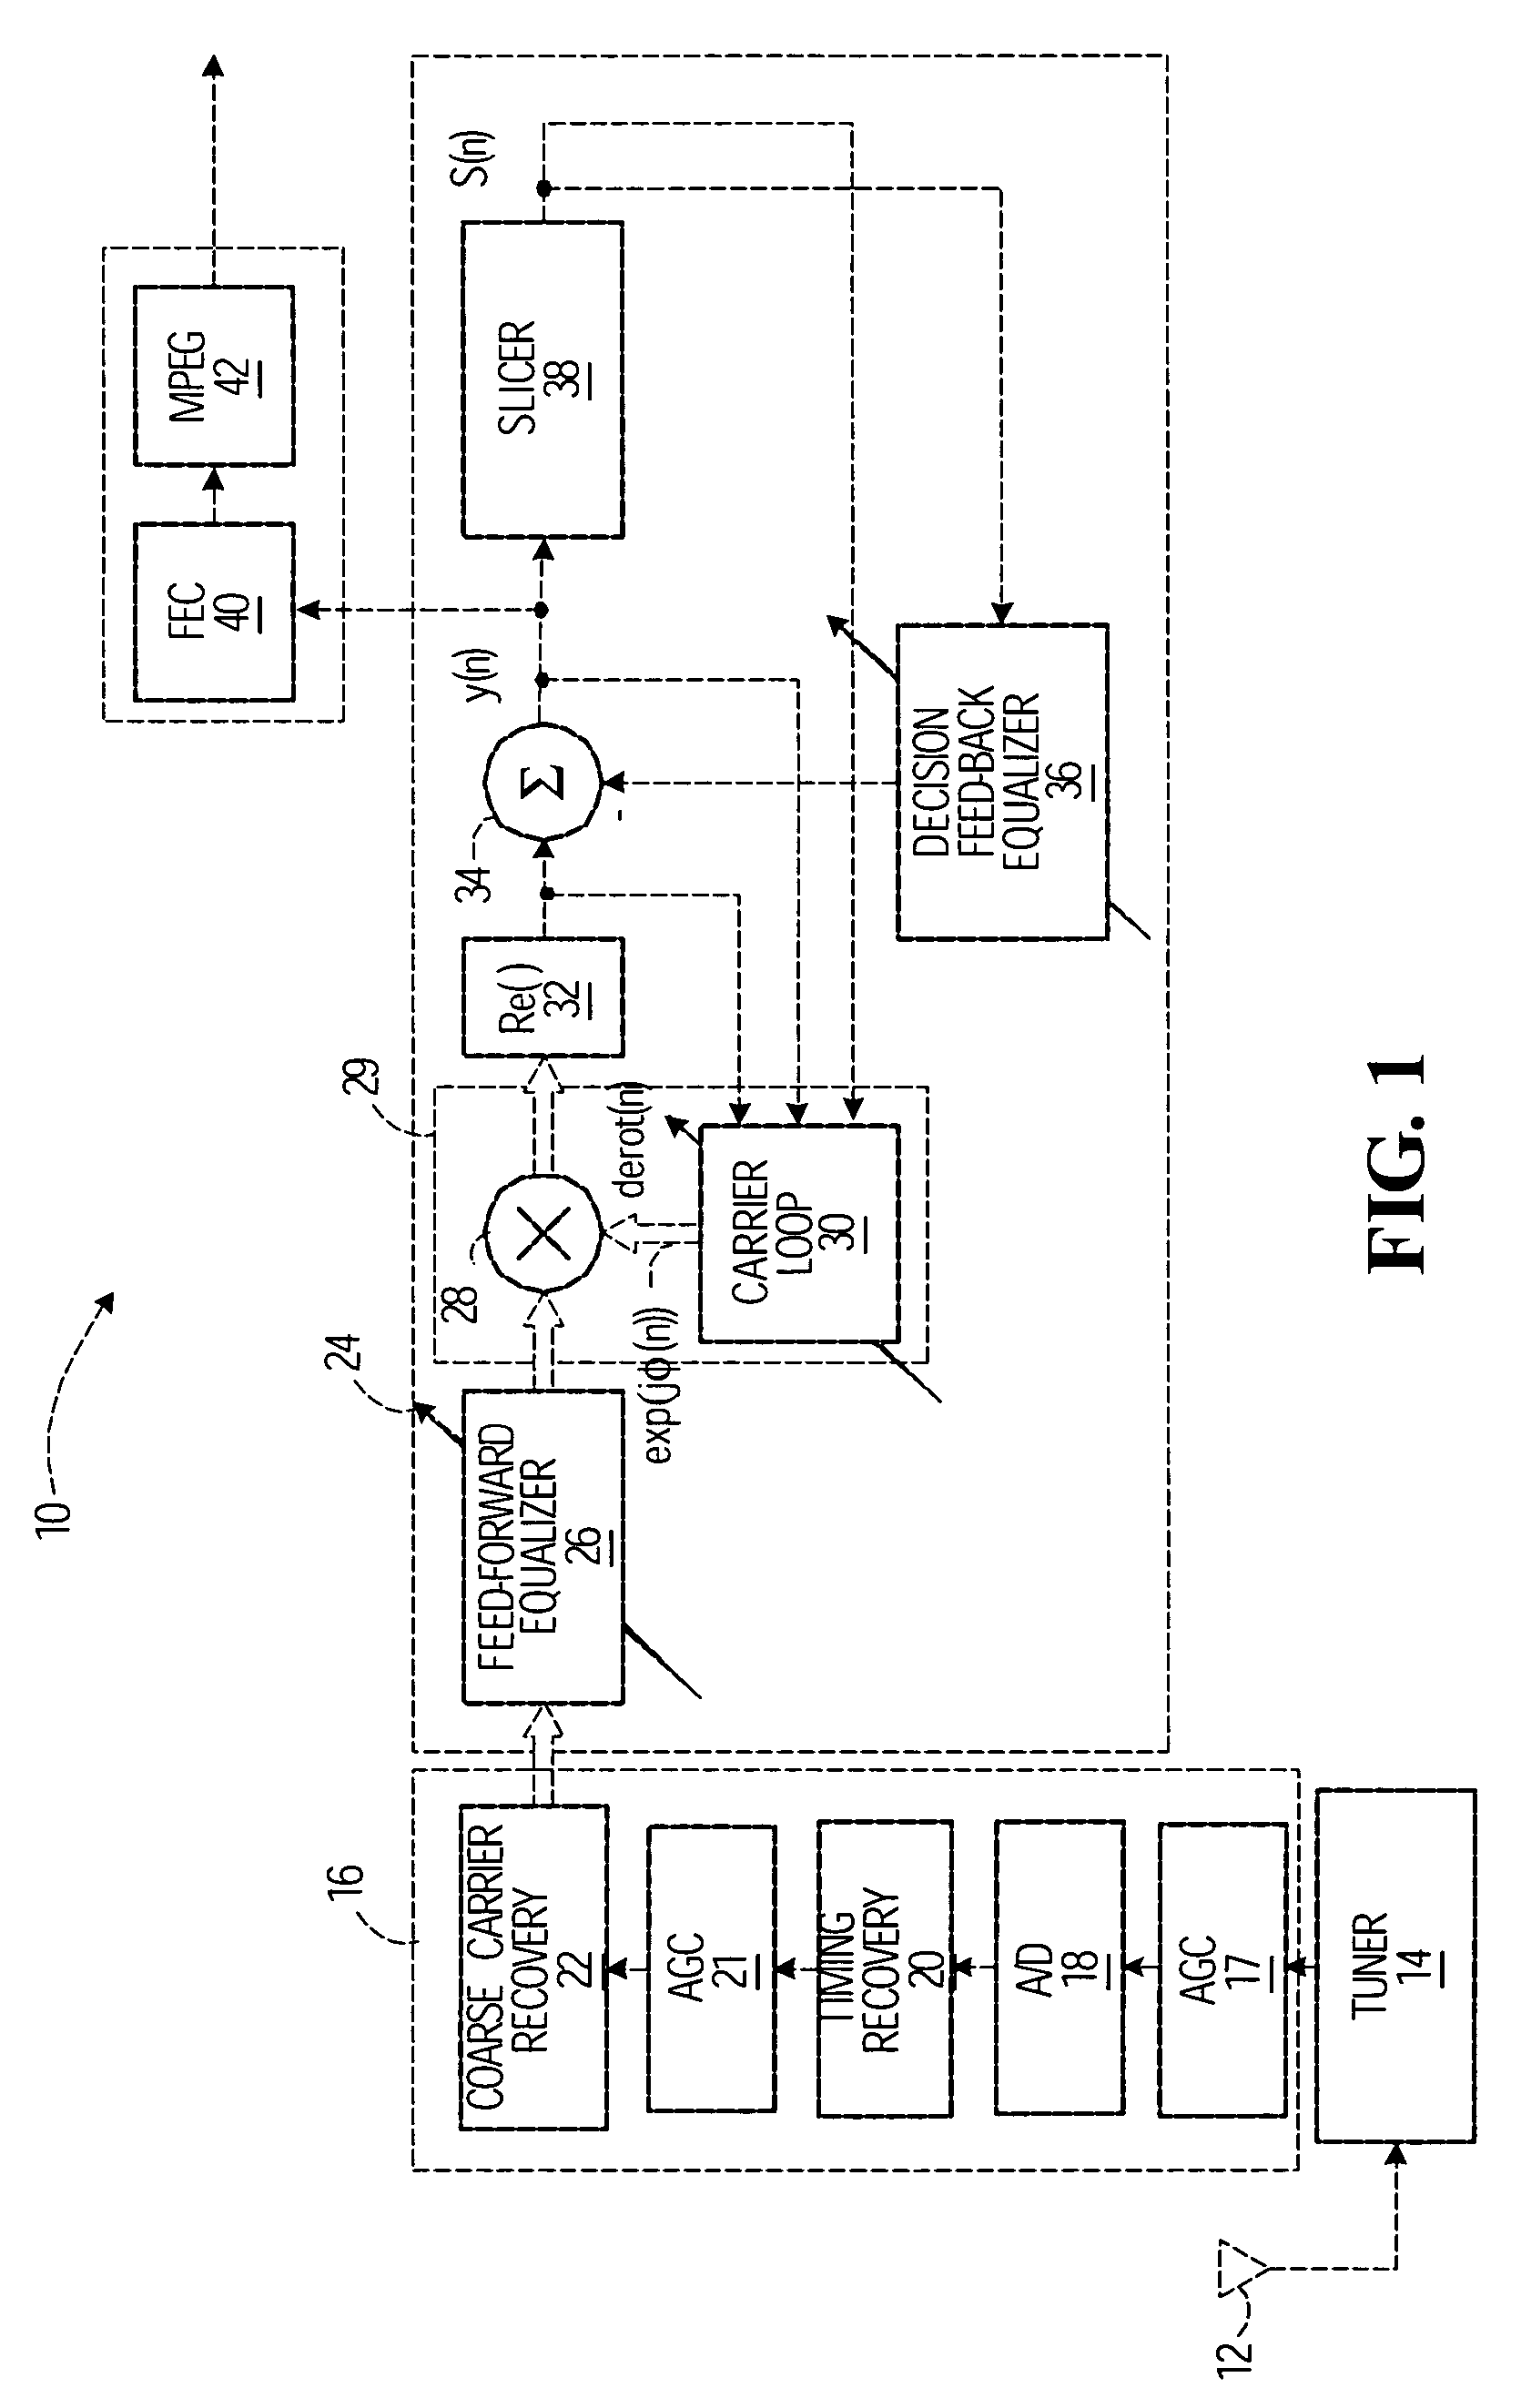 Digital receiver having adaptive carrier recovery circuit